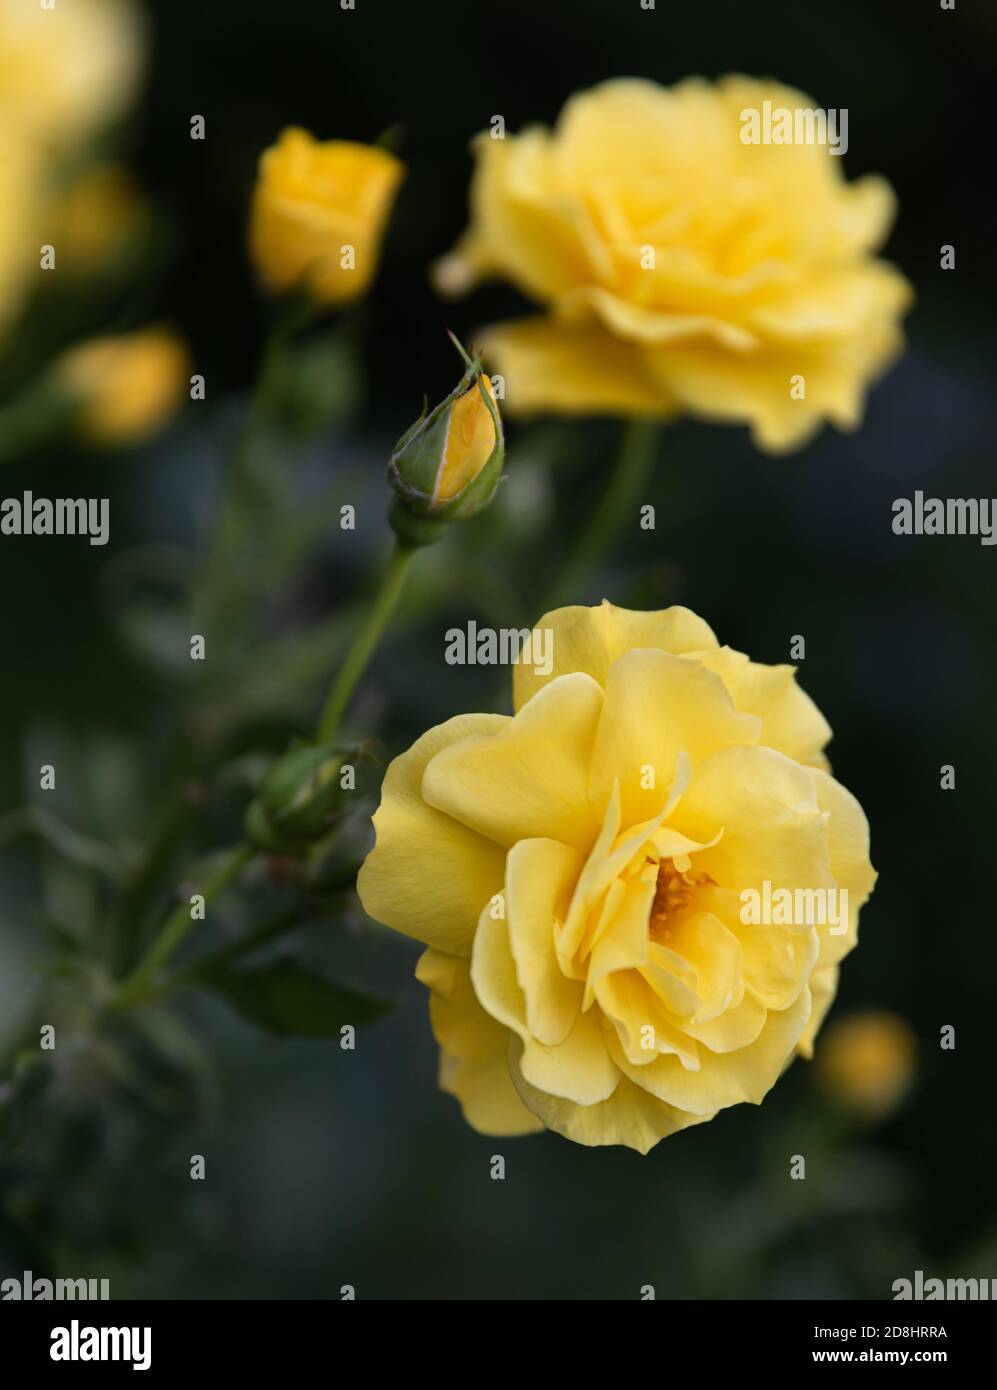 Gentle nature background with blooming roses. Beautiful rose ...